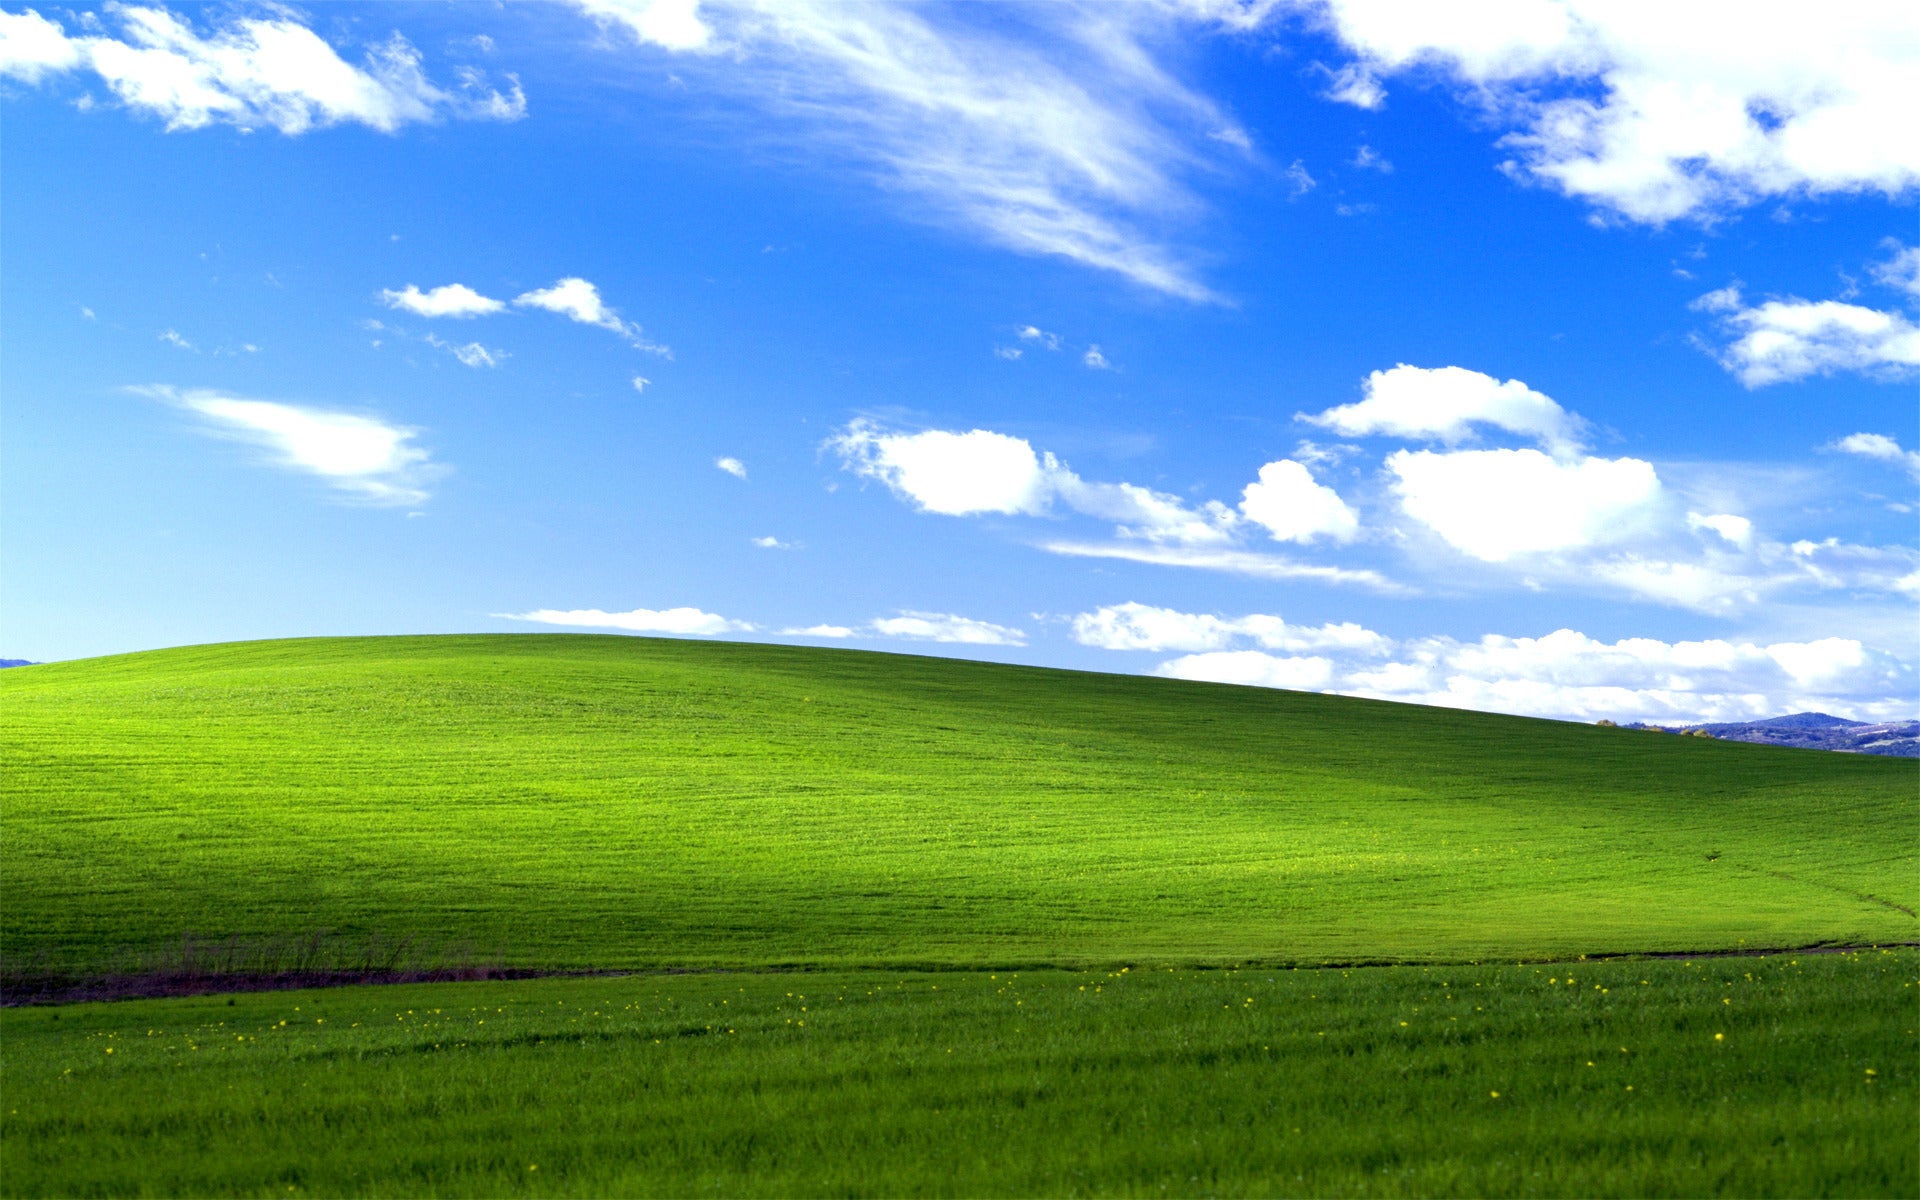 It’s Windows XP’s 16th birthday, yet this isn’t a cause for celebration